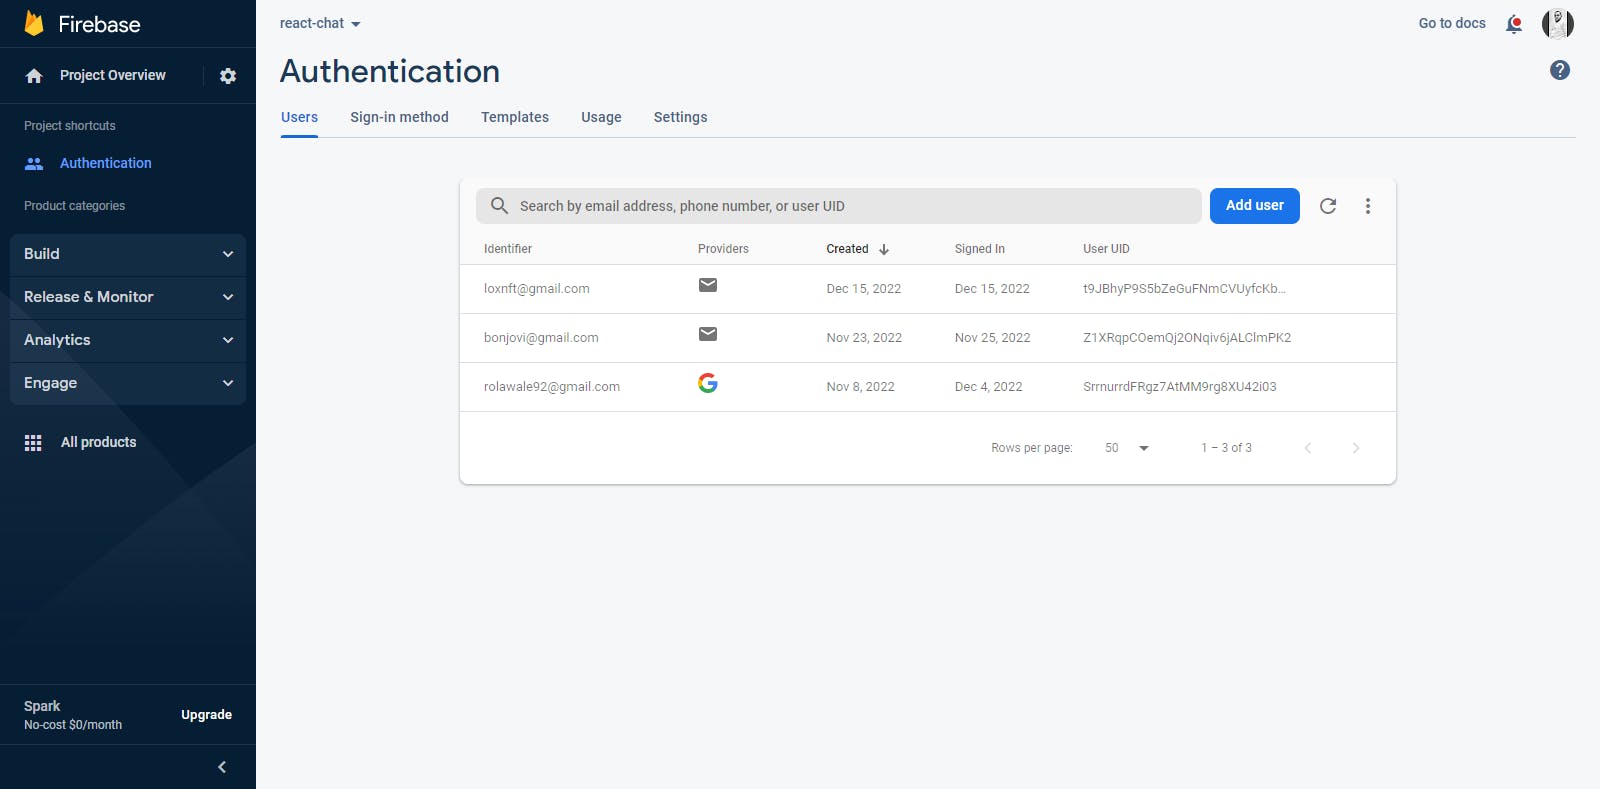 Firebase authentication users interface